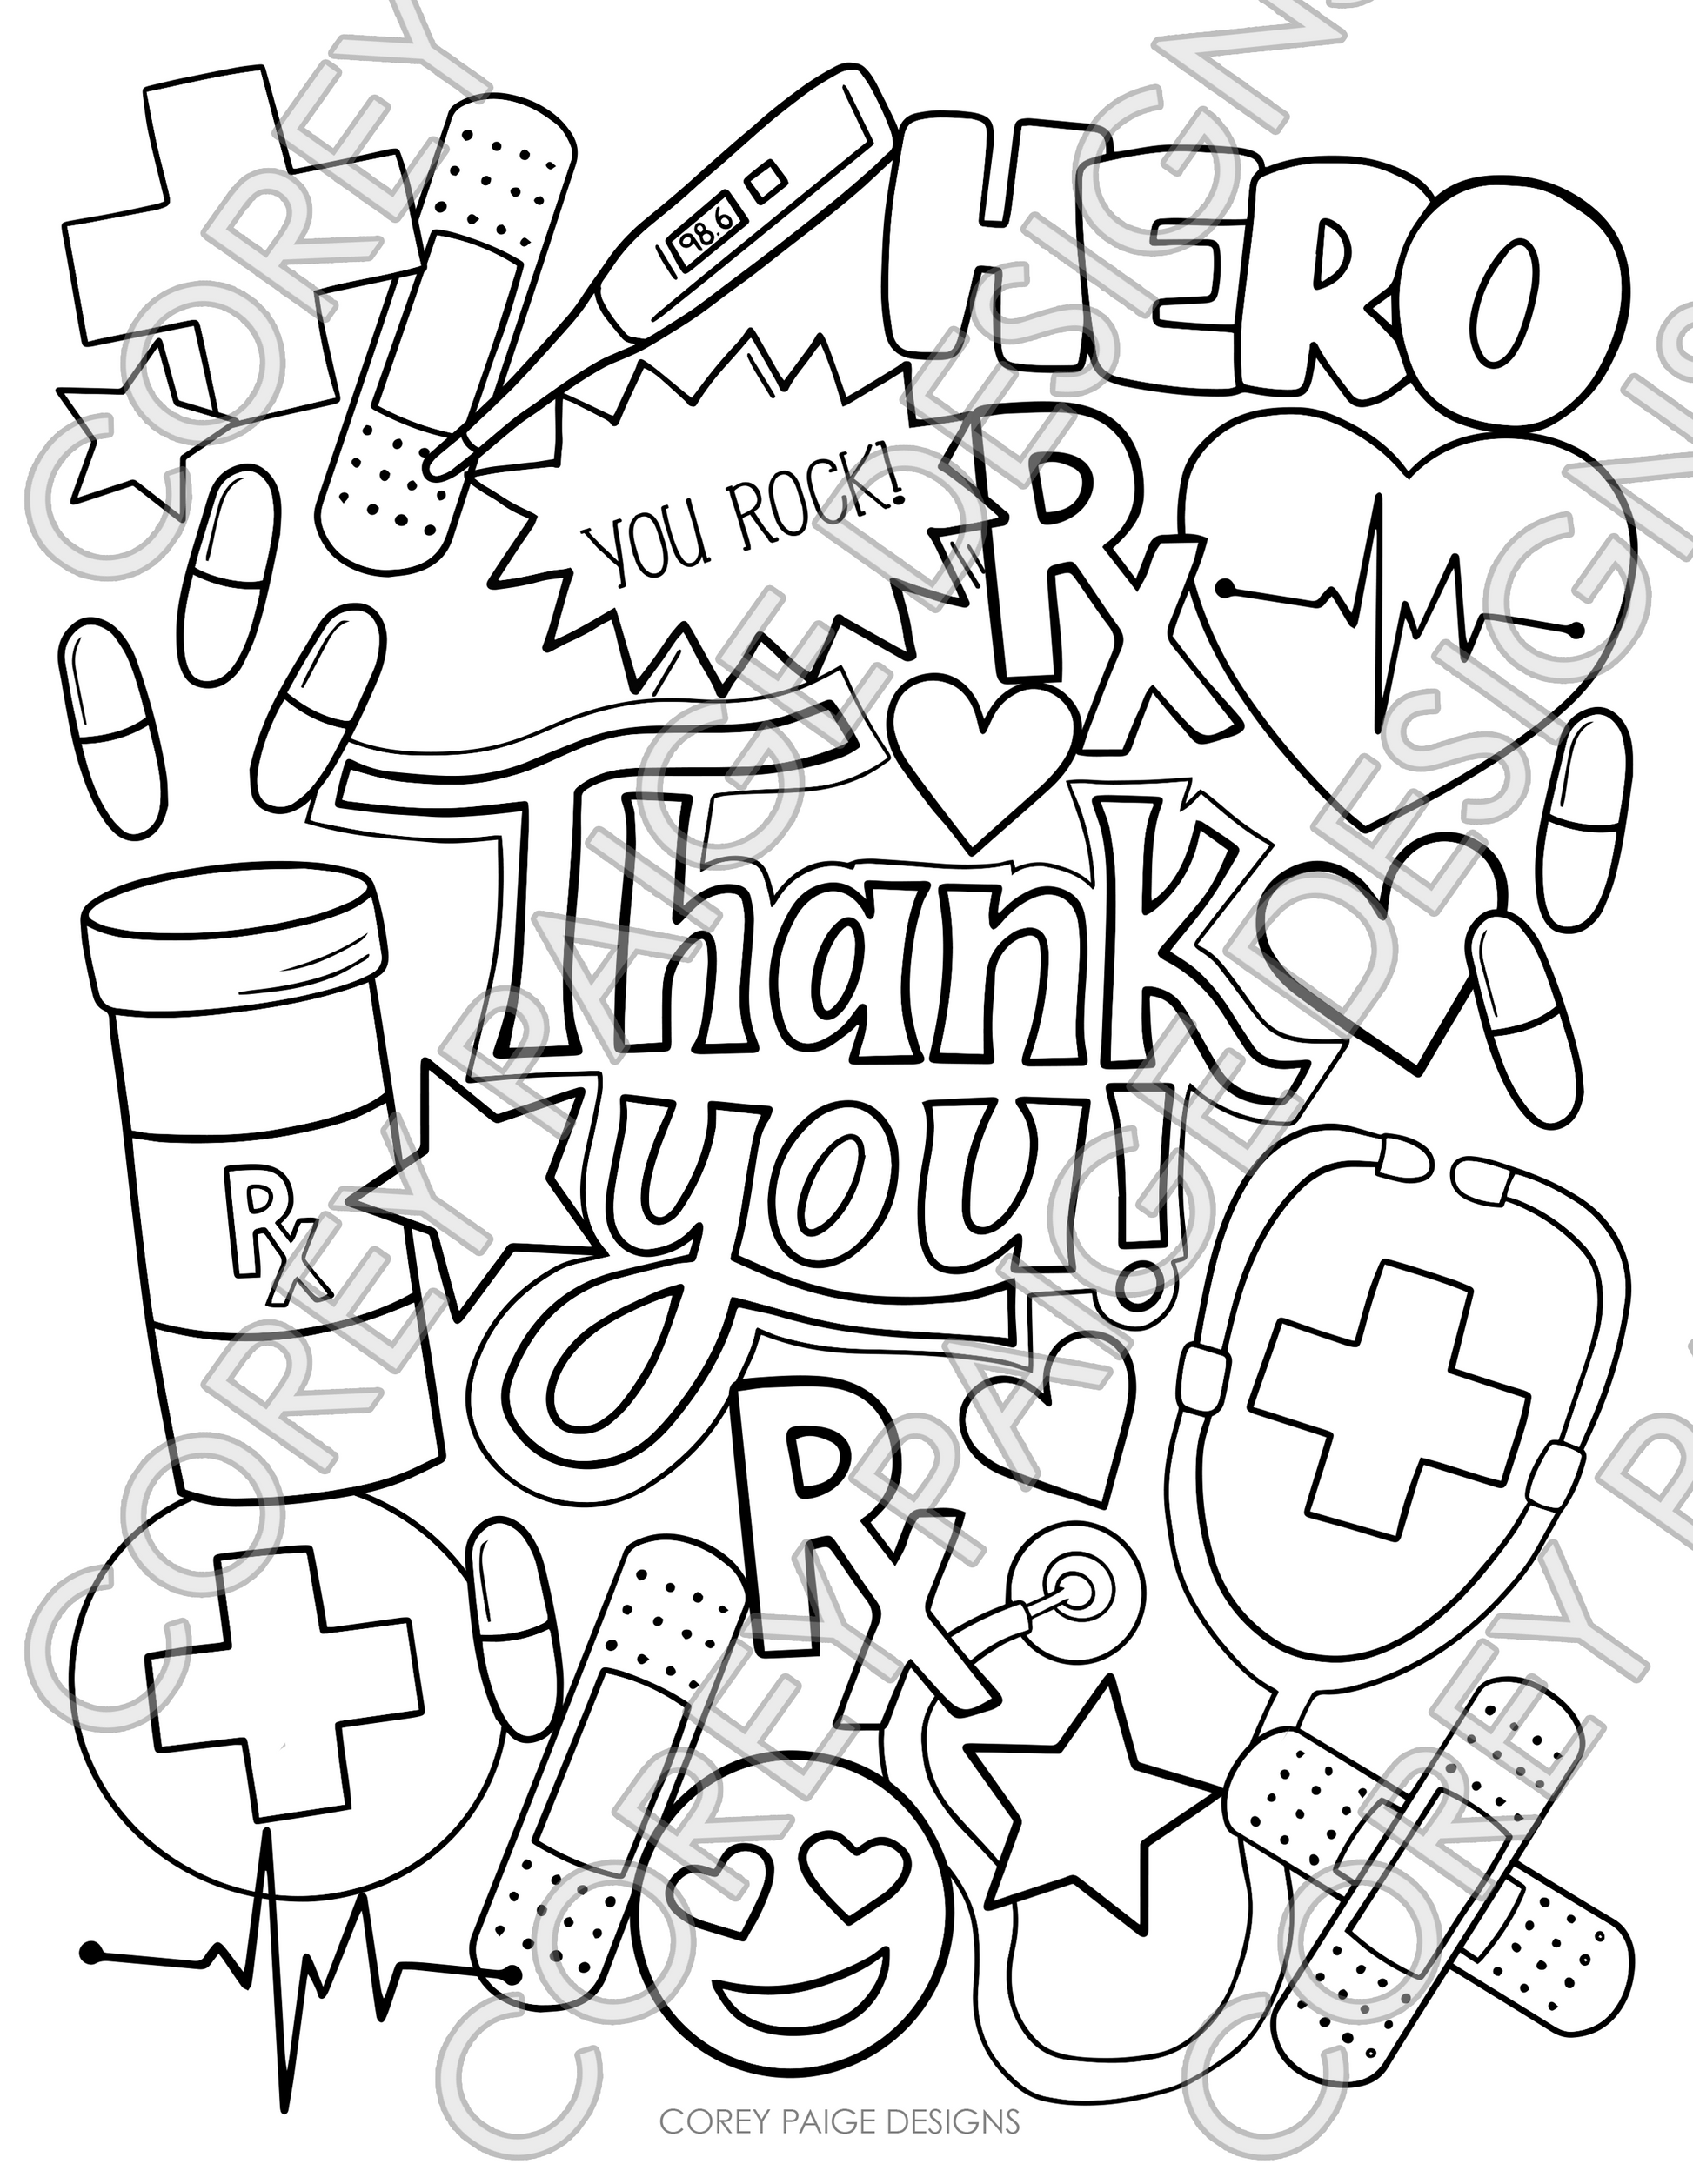 Printable Coloring Pages, Thank You Health Heroes, Love Our Health  Warriors, Digital Downloads -  Canada